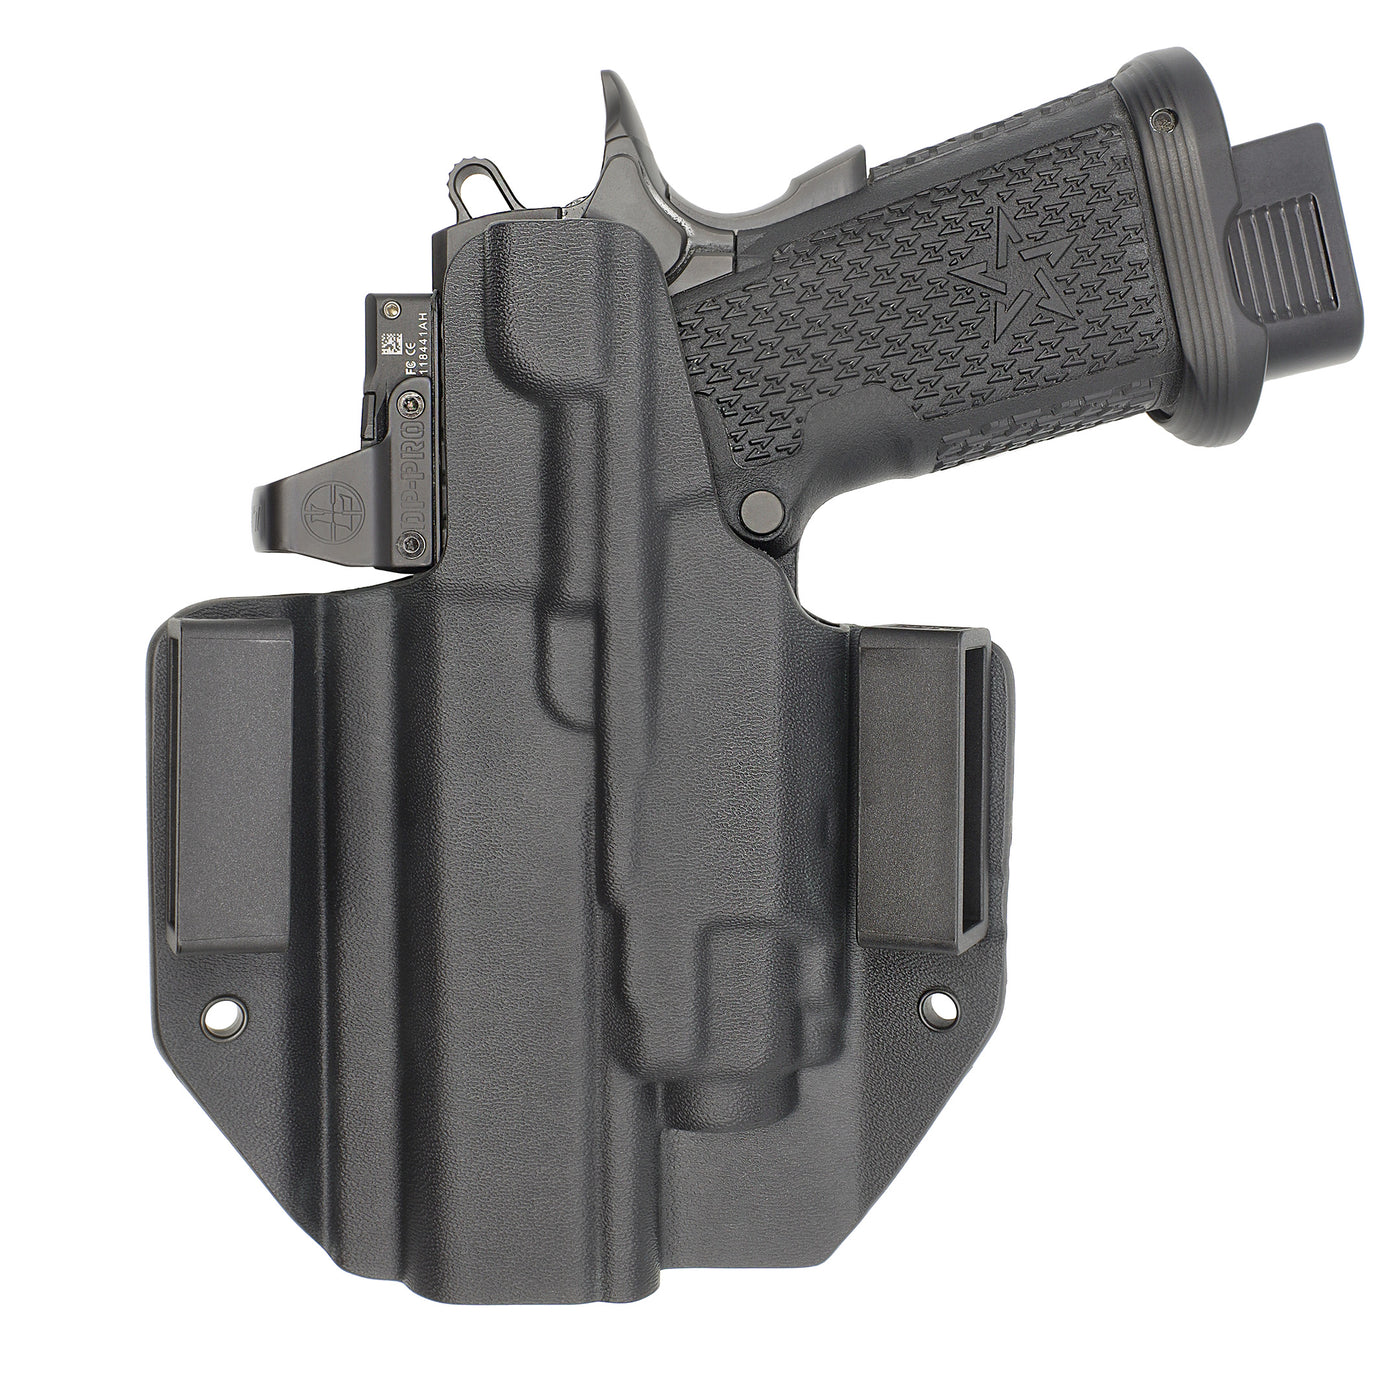 C&G Holsters Quickship OWB tactical 2011 streamlight TLR8 holstered back view